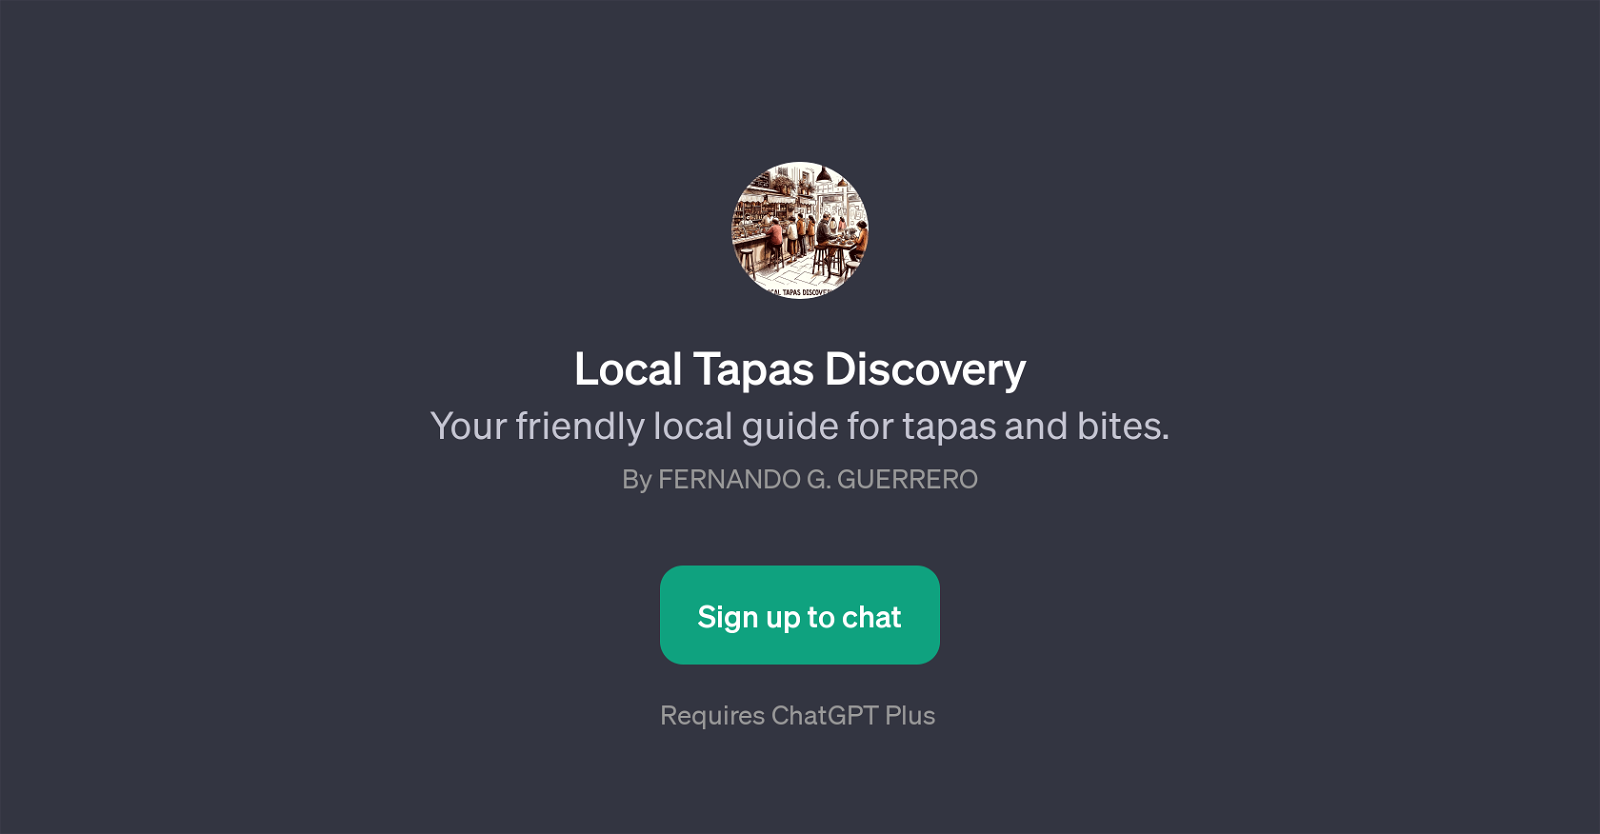 Local Tapas Discovery website